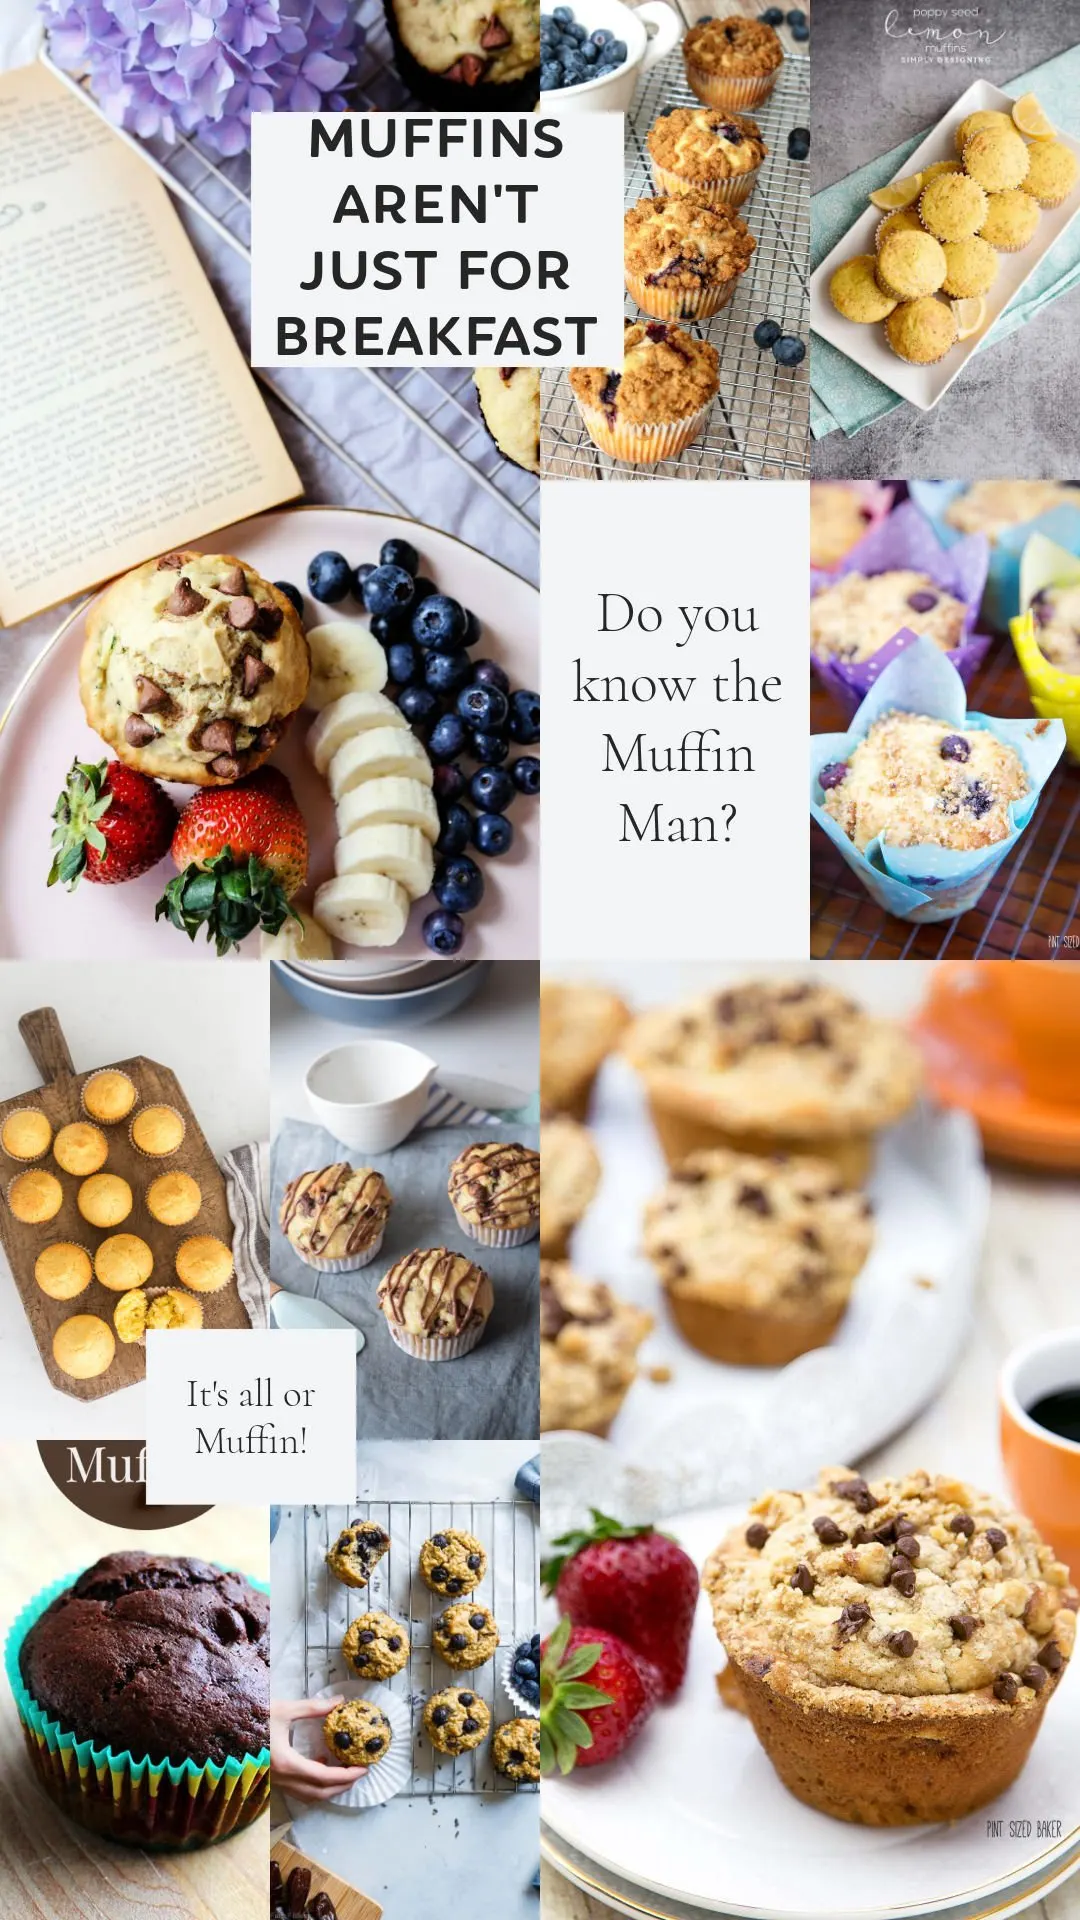 Send your kids back to school with a freezer full of homemade muffins ready for them. 15 Muffin Recipes to make in advance for breakfast.